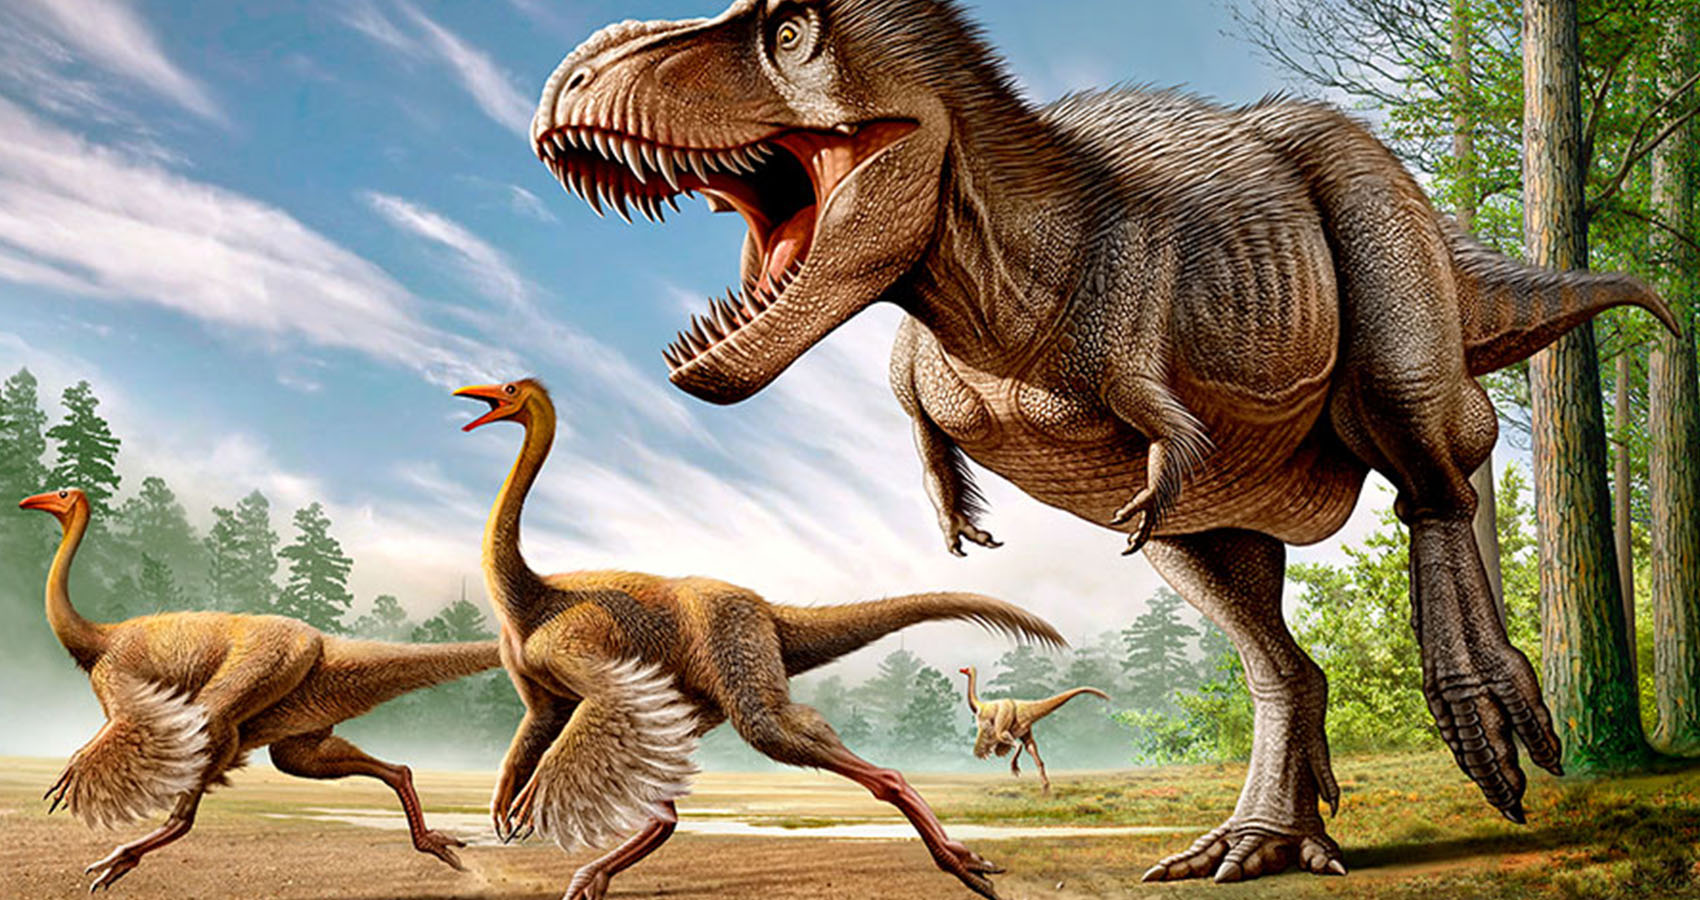 hard to believe facts - Dinosaurs are older than grass. Every artist rendition you've seen of them roaming fields is wrong. Most ground level plants were ferns or flowering bushes, not grass.